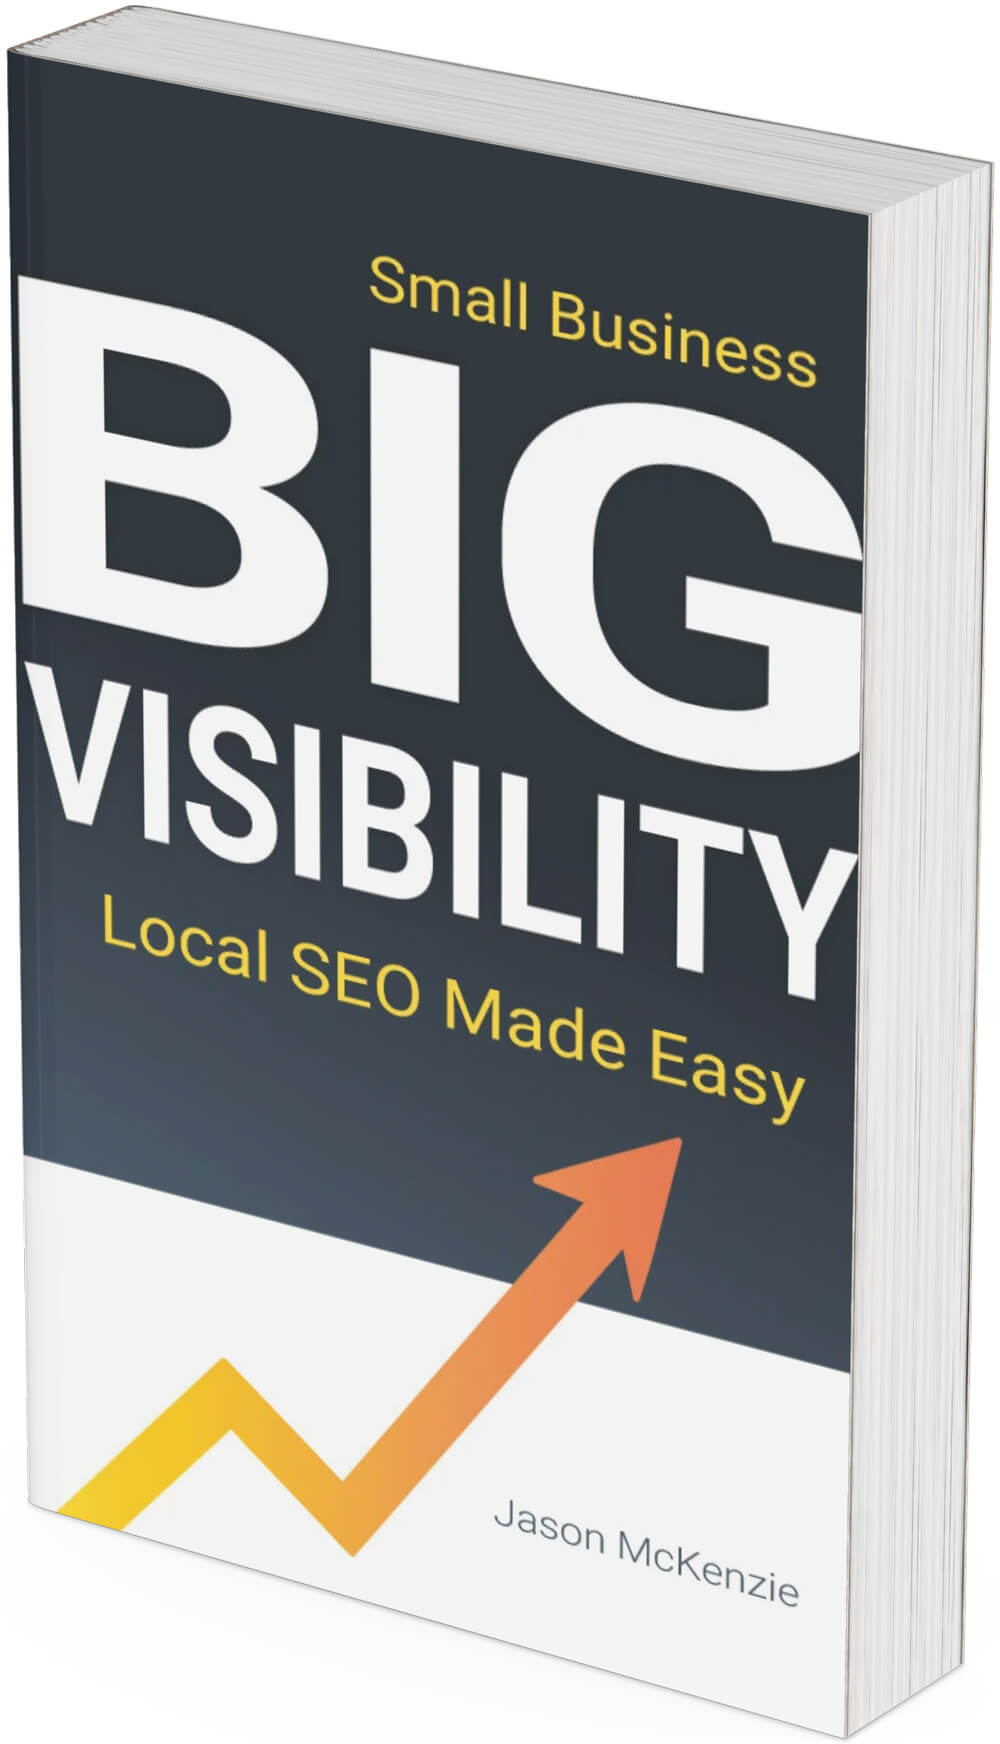 Book Cover of Small Business Big Visibility: Local SEO Made Easy